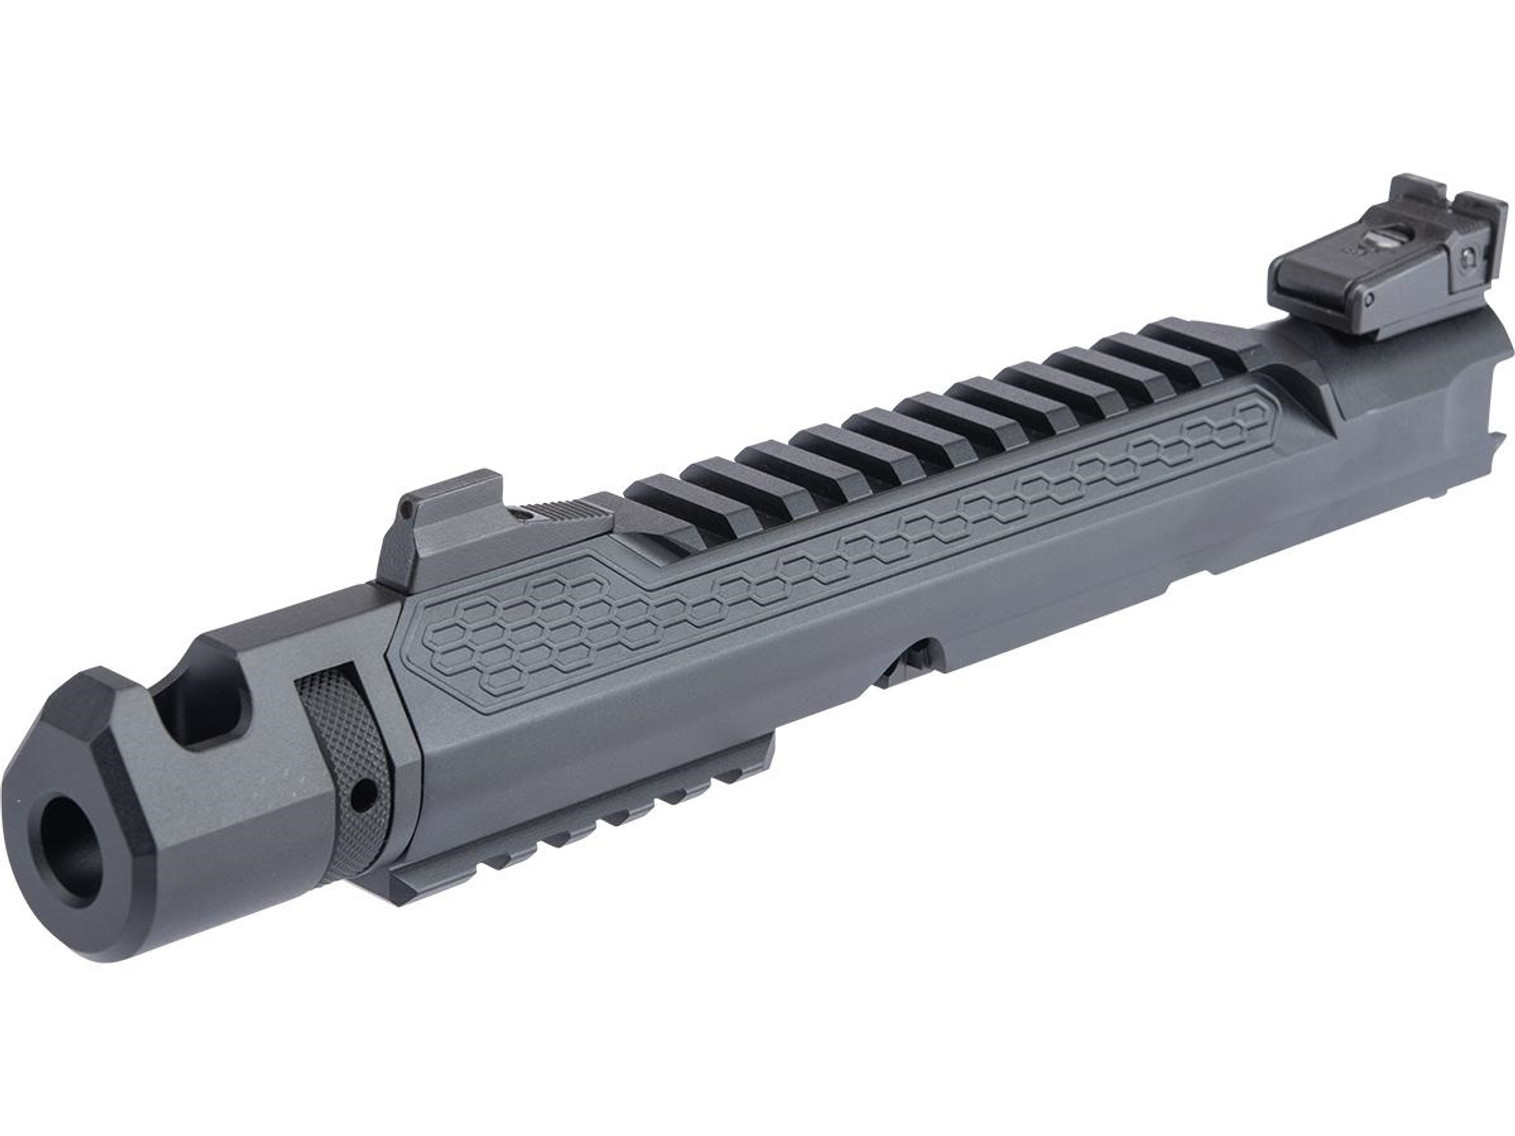 Action Army Black Mamba CNC Upper Receiver Kit for AAP-01 Gas Blowback Airsoft Pistols